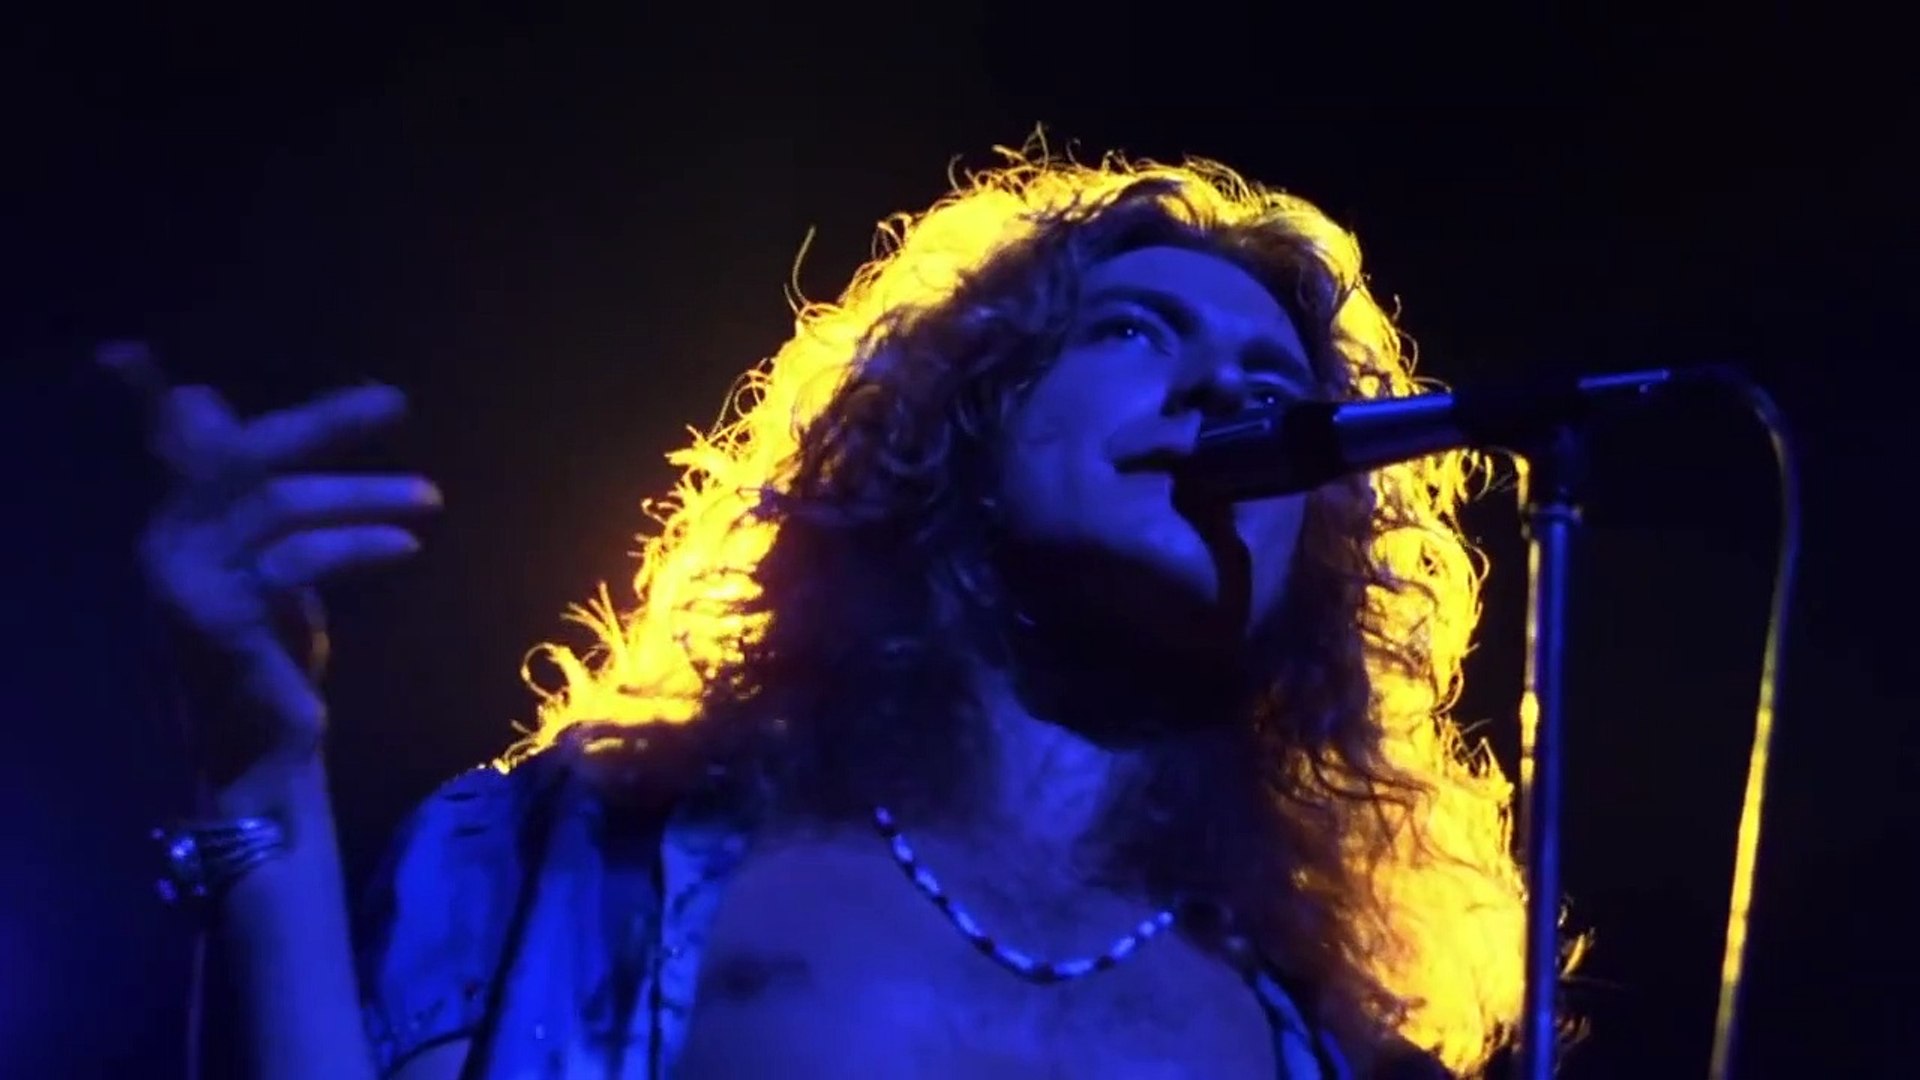 Led Zeppelin - Stairway to Heaven Live - Vidéo Dailymotion